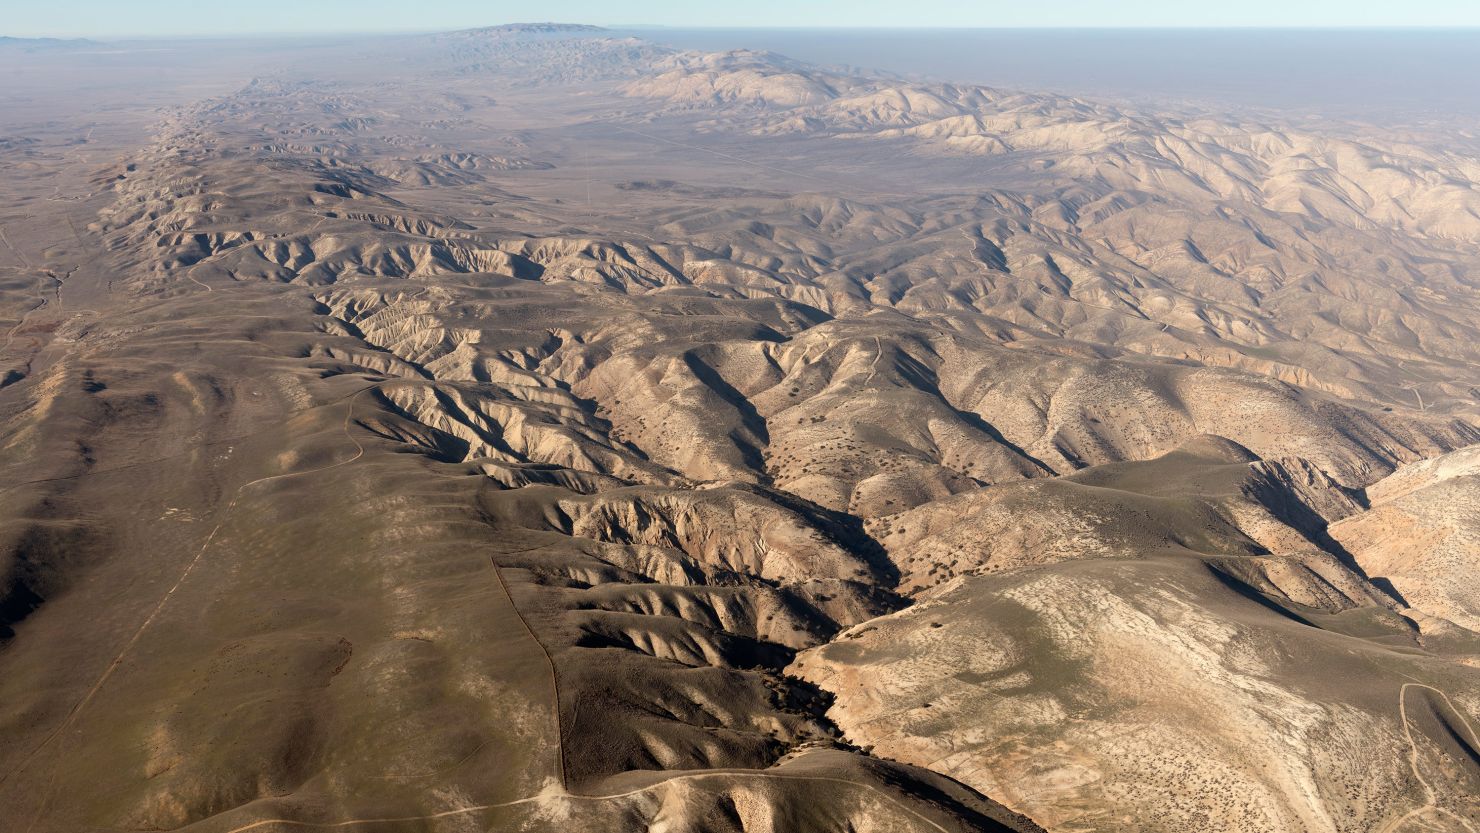 The San Andreas Fault system, which stretches more than 800 miles in California, causes a powerful earthquake about every 150 years, according to the U.S. Geological Survey.